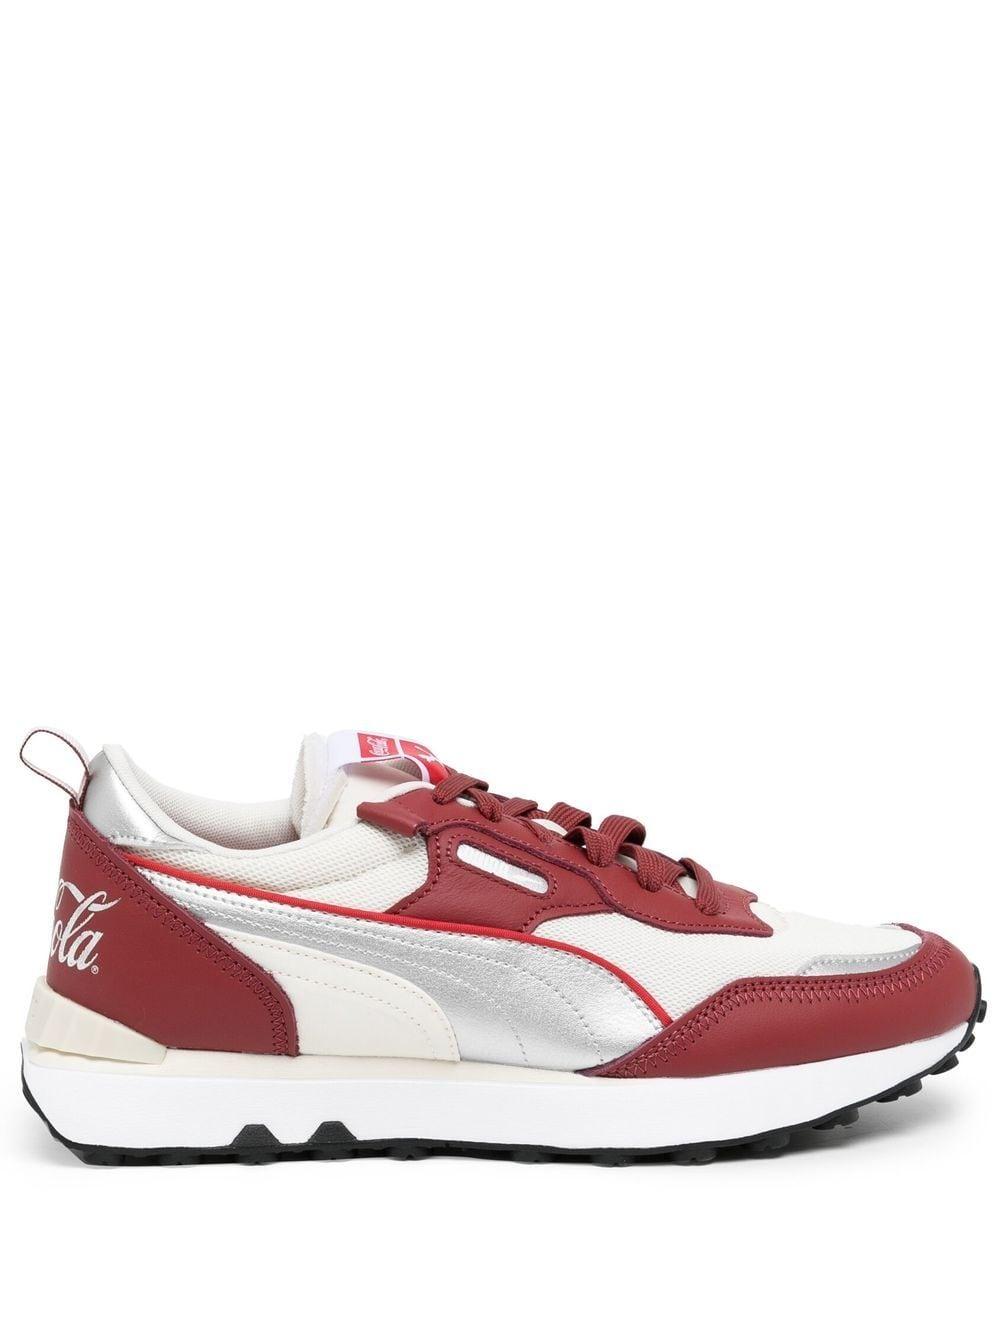 PUMA Rider Coca-cola Sneakers in Pink for Men | Lyst